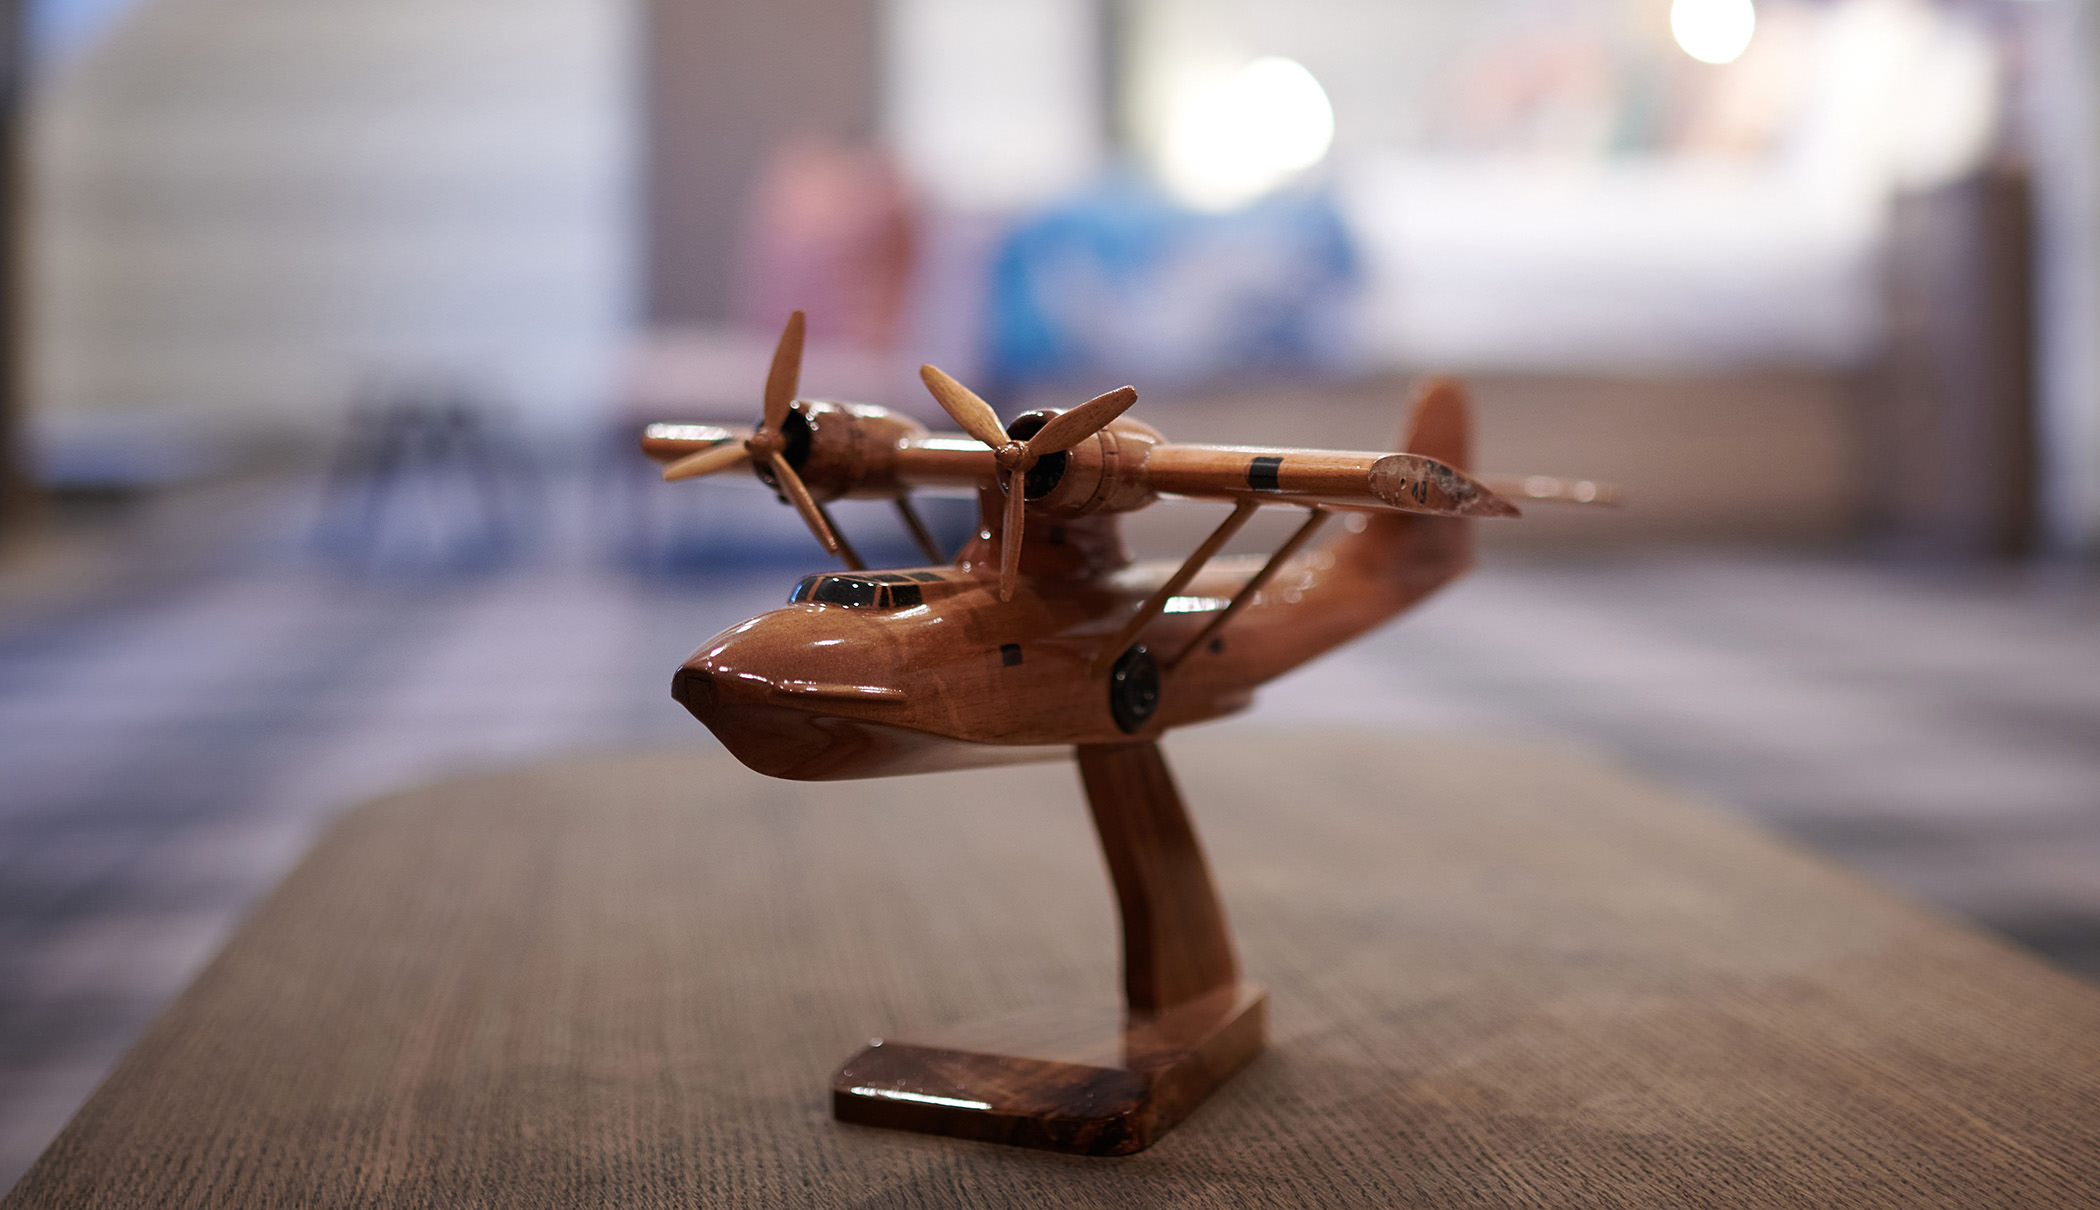 a close up view of a small wooden plane sitting on a table